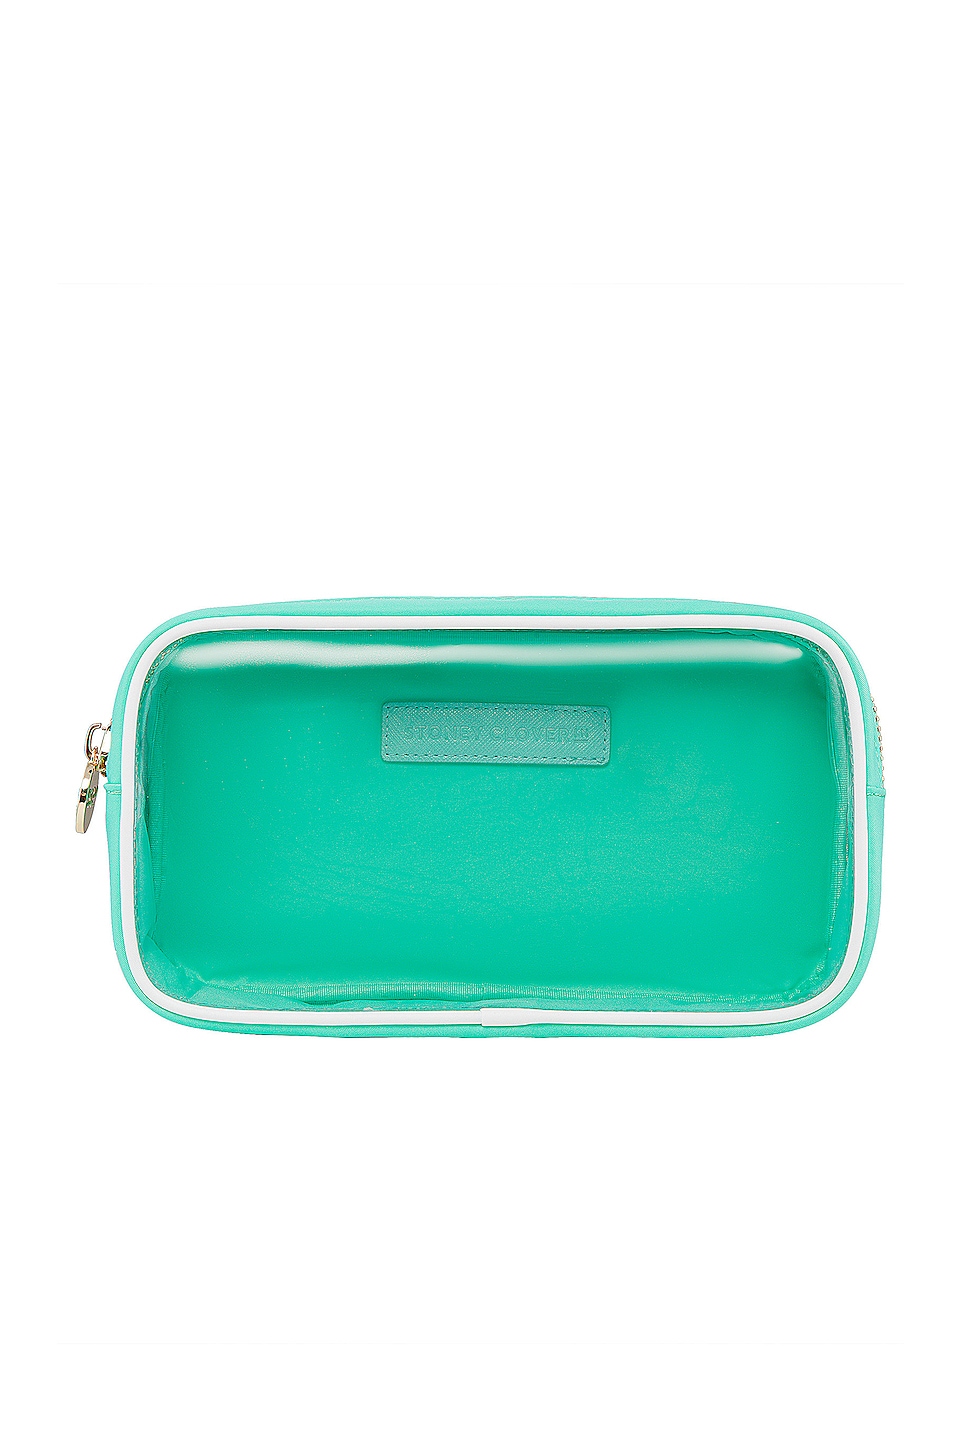 Stoney Clover Lane Clear Small Pouch in Lagoon - Teal. Size all.